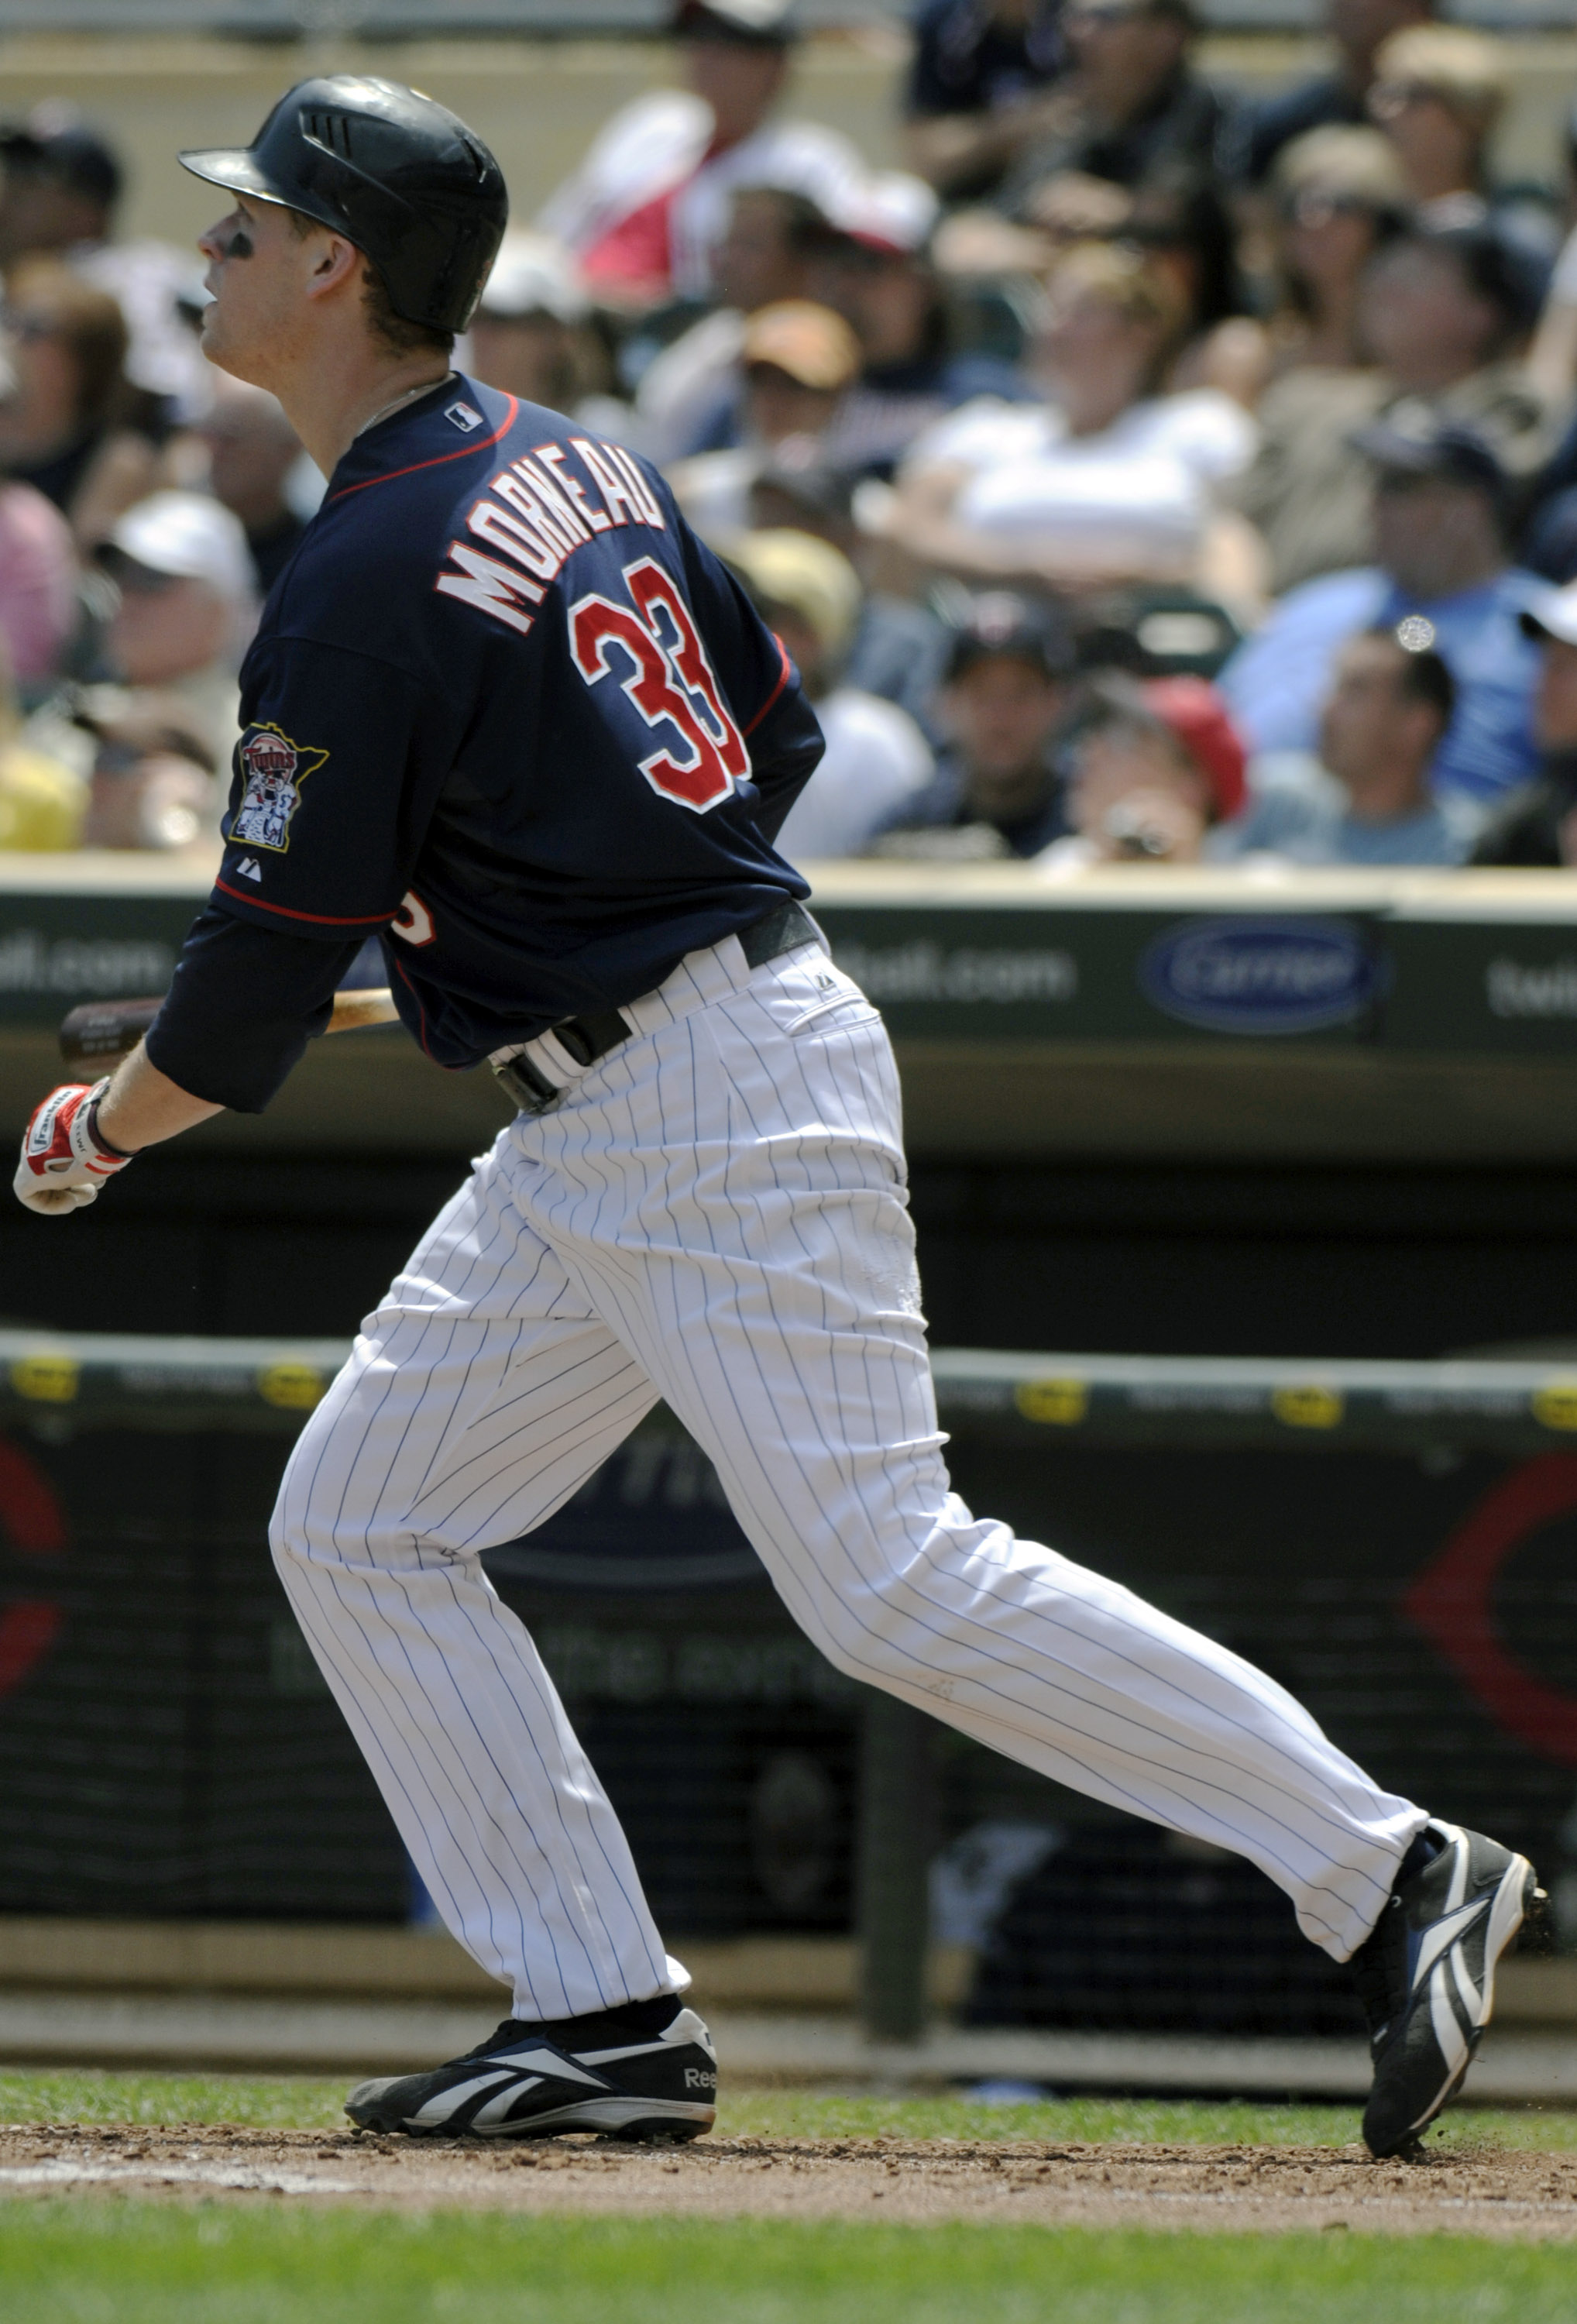 MINNEAPOLIS, MN - JUNE 30: Justin Morneau #33 of the Minnesota Twins watches the flight of his solo home run in the sixth inning against the Detroit Tigers during their game on June 30, 2010 at Target Field in Minneapolis, Minnesota. (Photo by Hannah Fosl